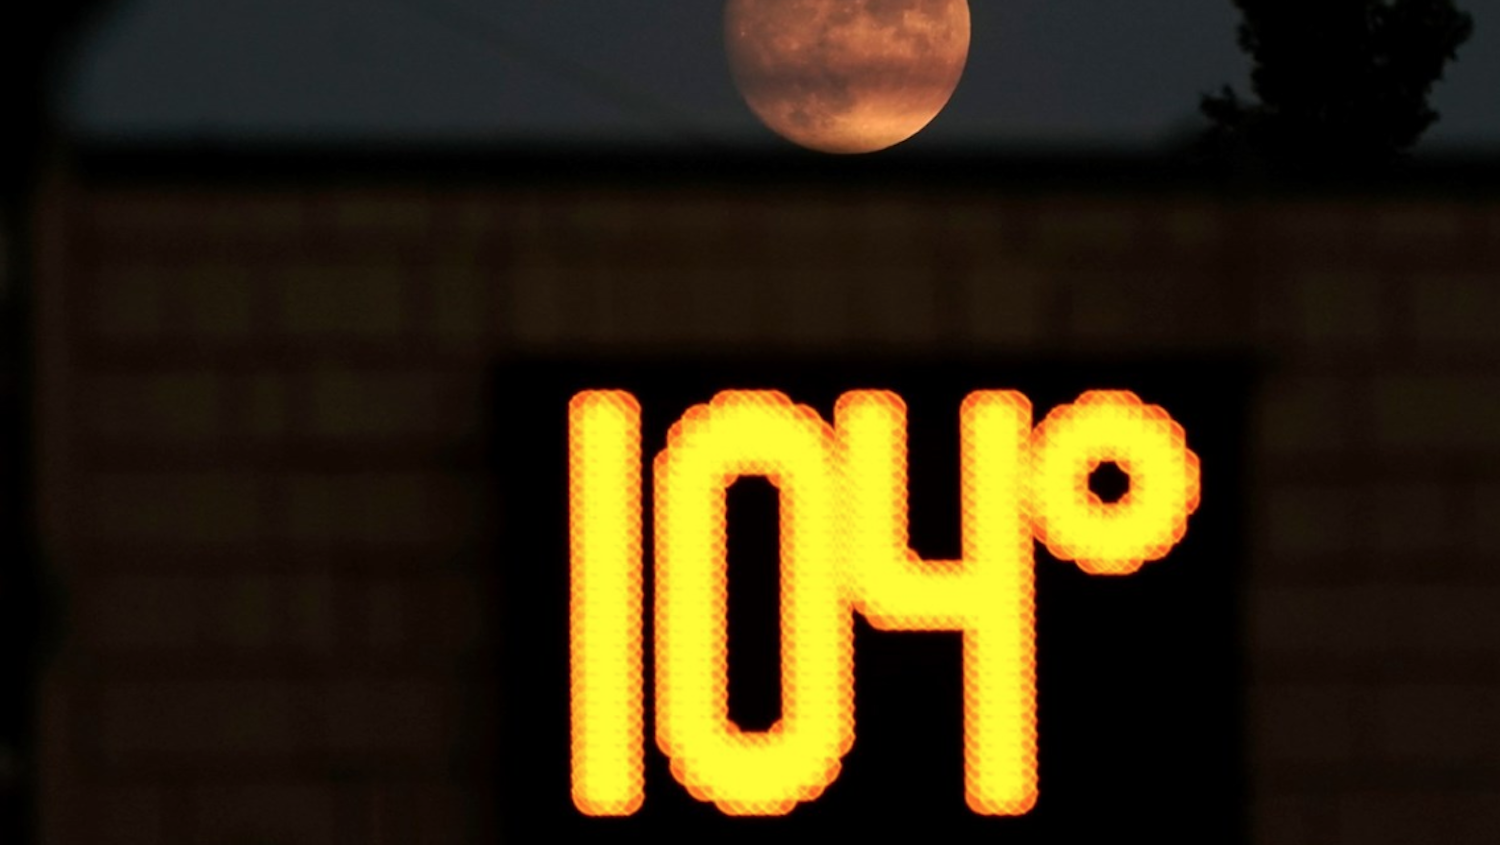 temperature gauge showing 104 degrees as moon rises